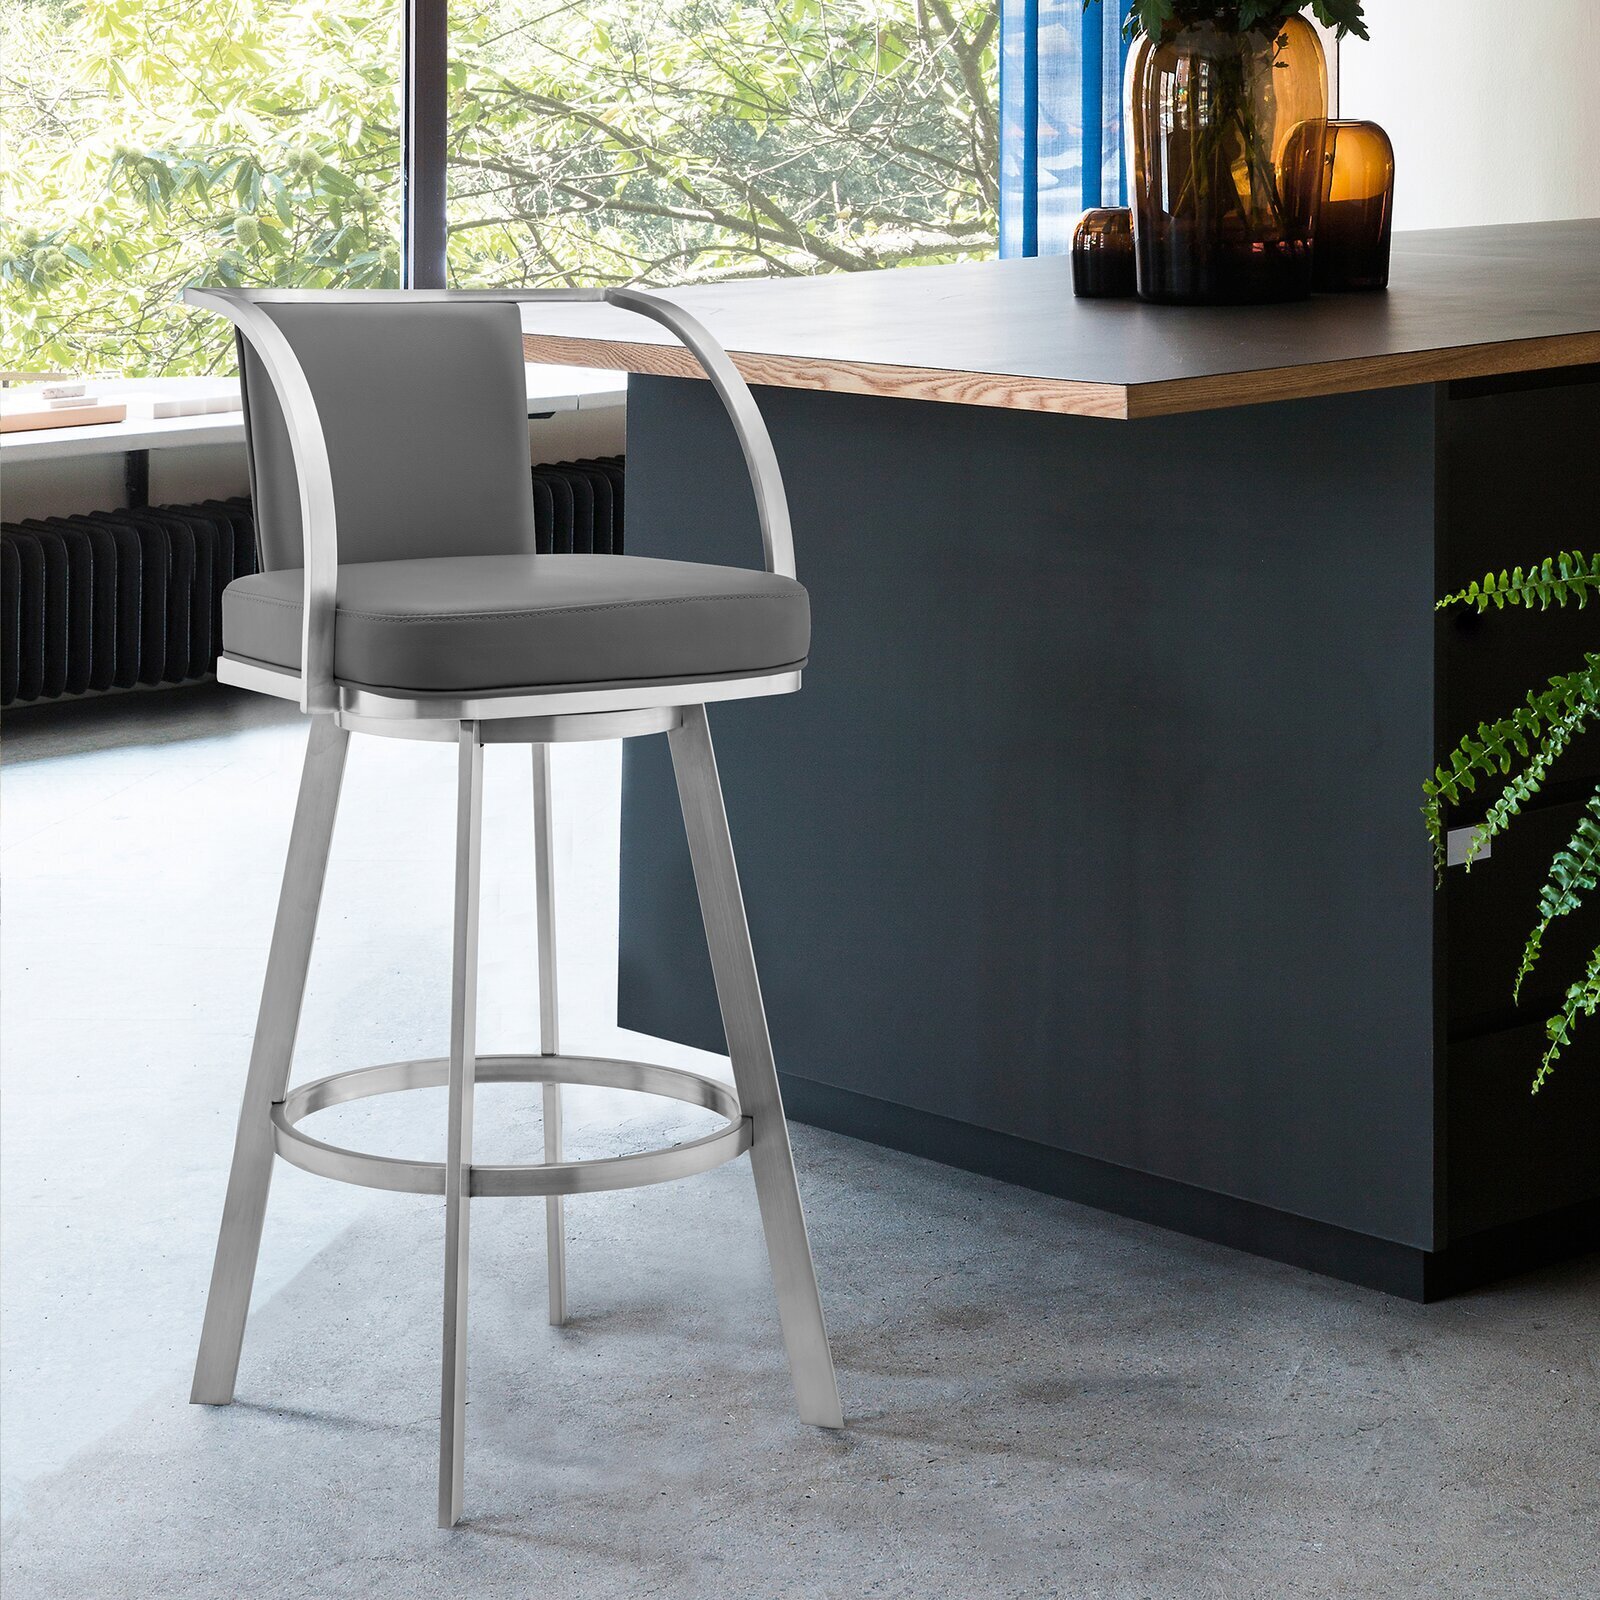 Swivel Stainless Steel Stools With Back